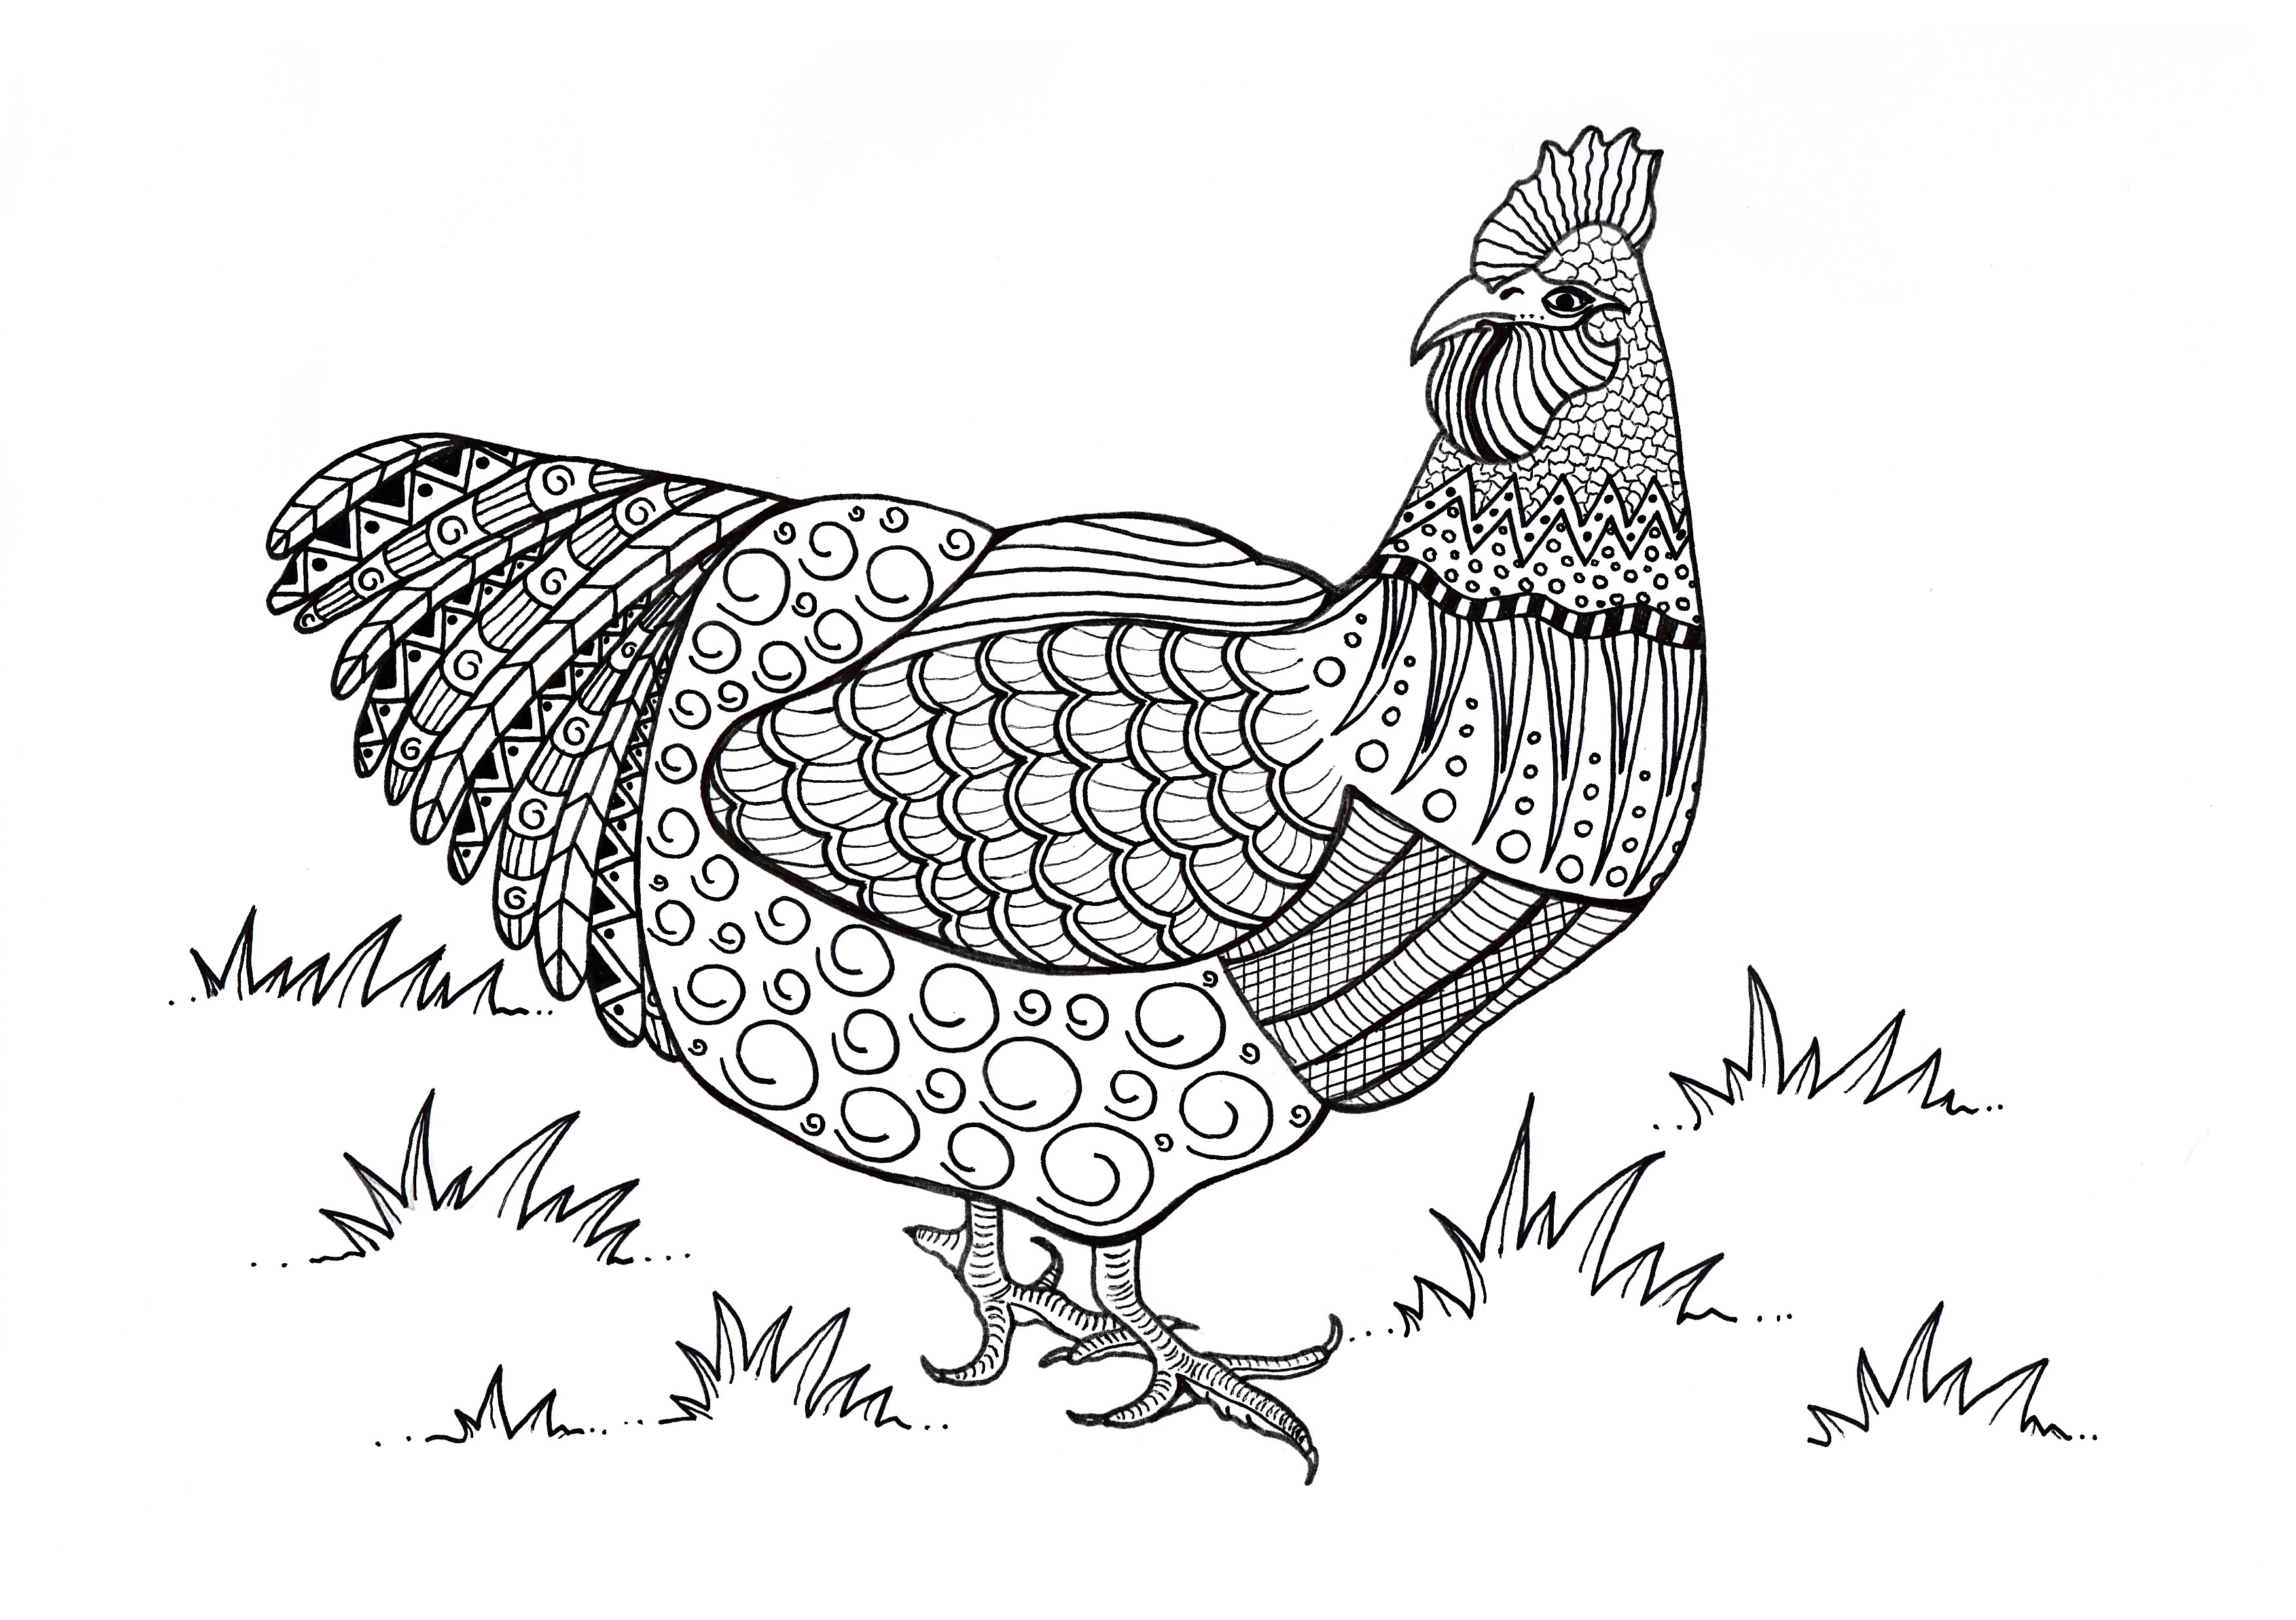 Download FREE Adult Coloring Pages - Happiness is Homemade